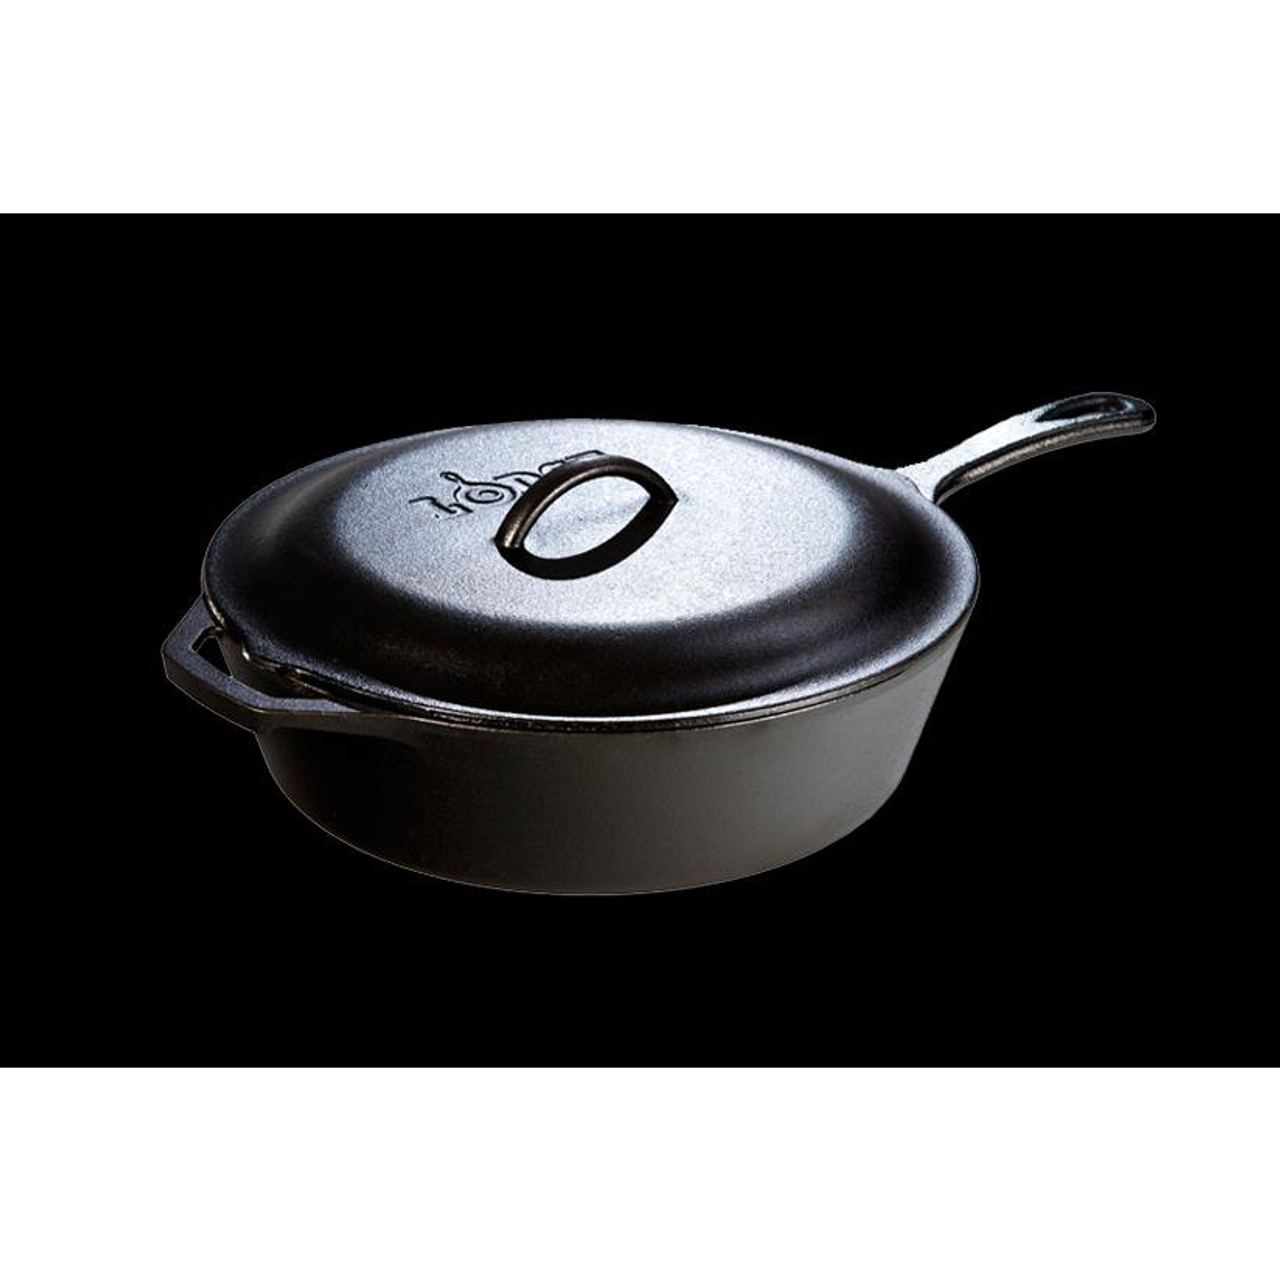 https://cdn11.bigcommerce.com/s-stfpjhht/images/stencil/1280x1280/products/718/16776/Lodge-Mfg-Deep-Skillet-Chicken-Fryer-with-Cover-5-quart-L10CF3-075536351209_image1__73657.1509745248.jpg?c=2